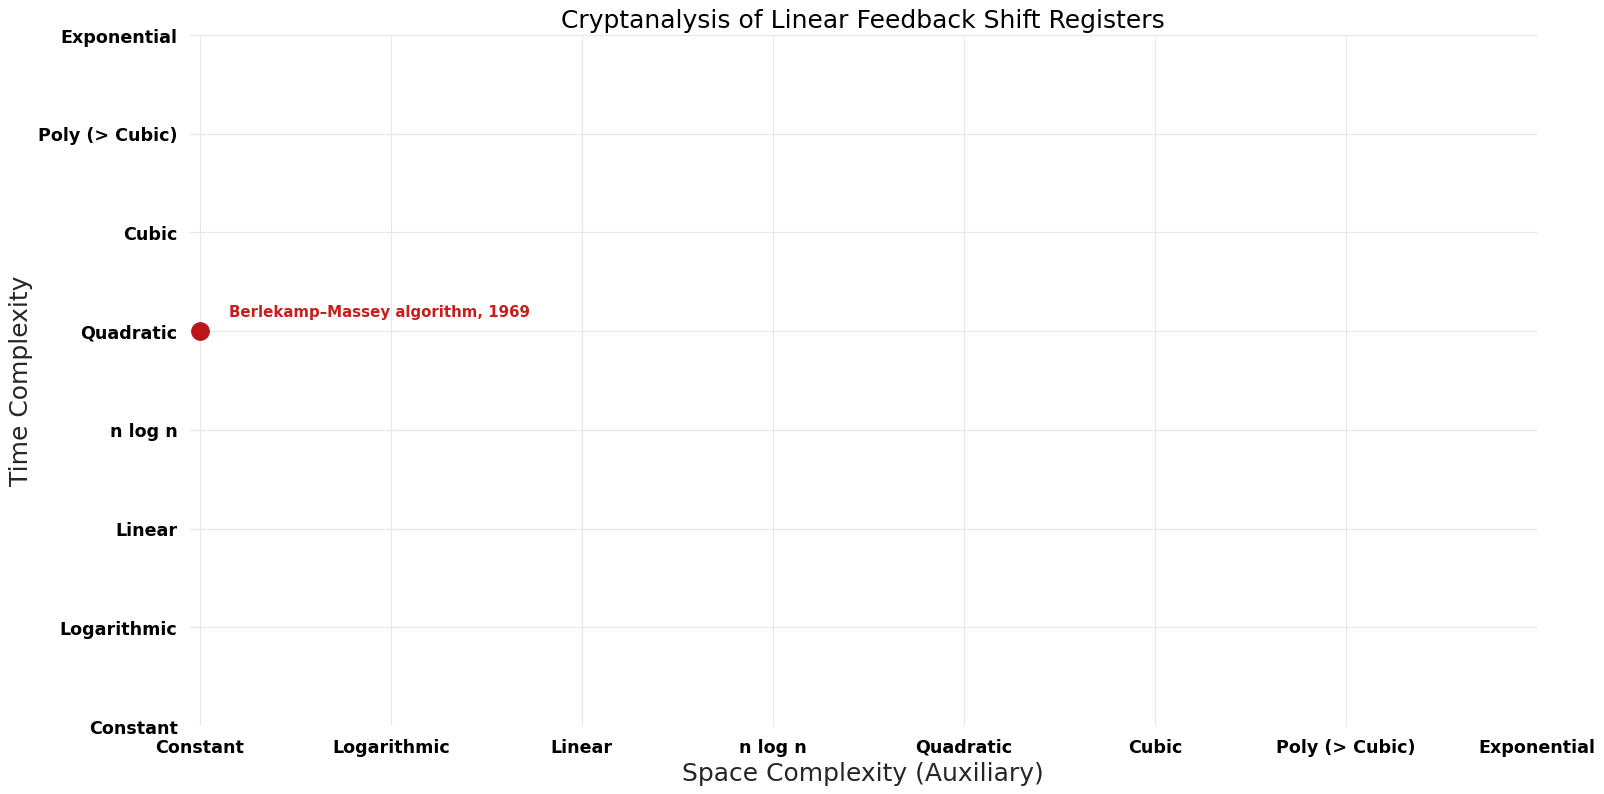 File:Cryptanalysis of Linear Feedback Shift Registers - Pareto Frontier.png